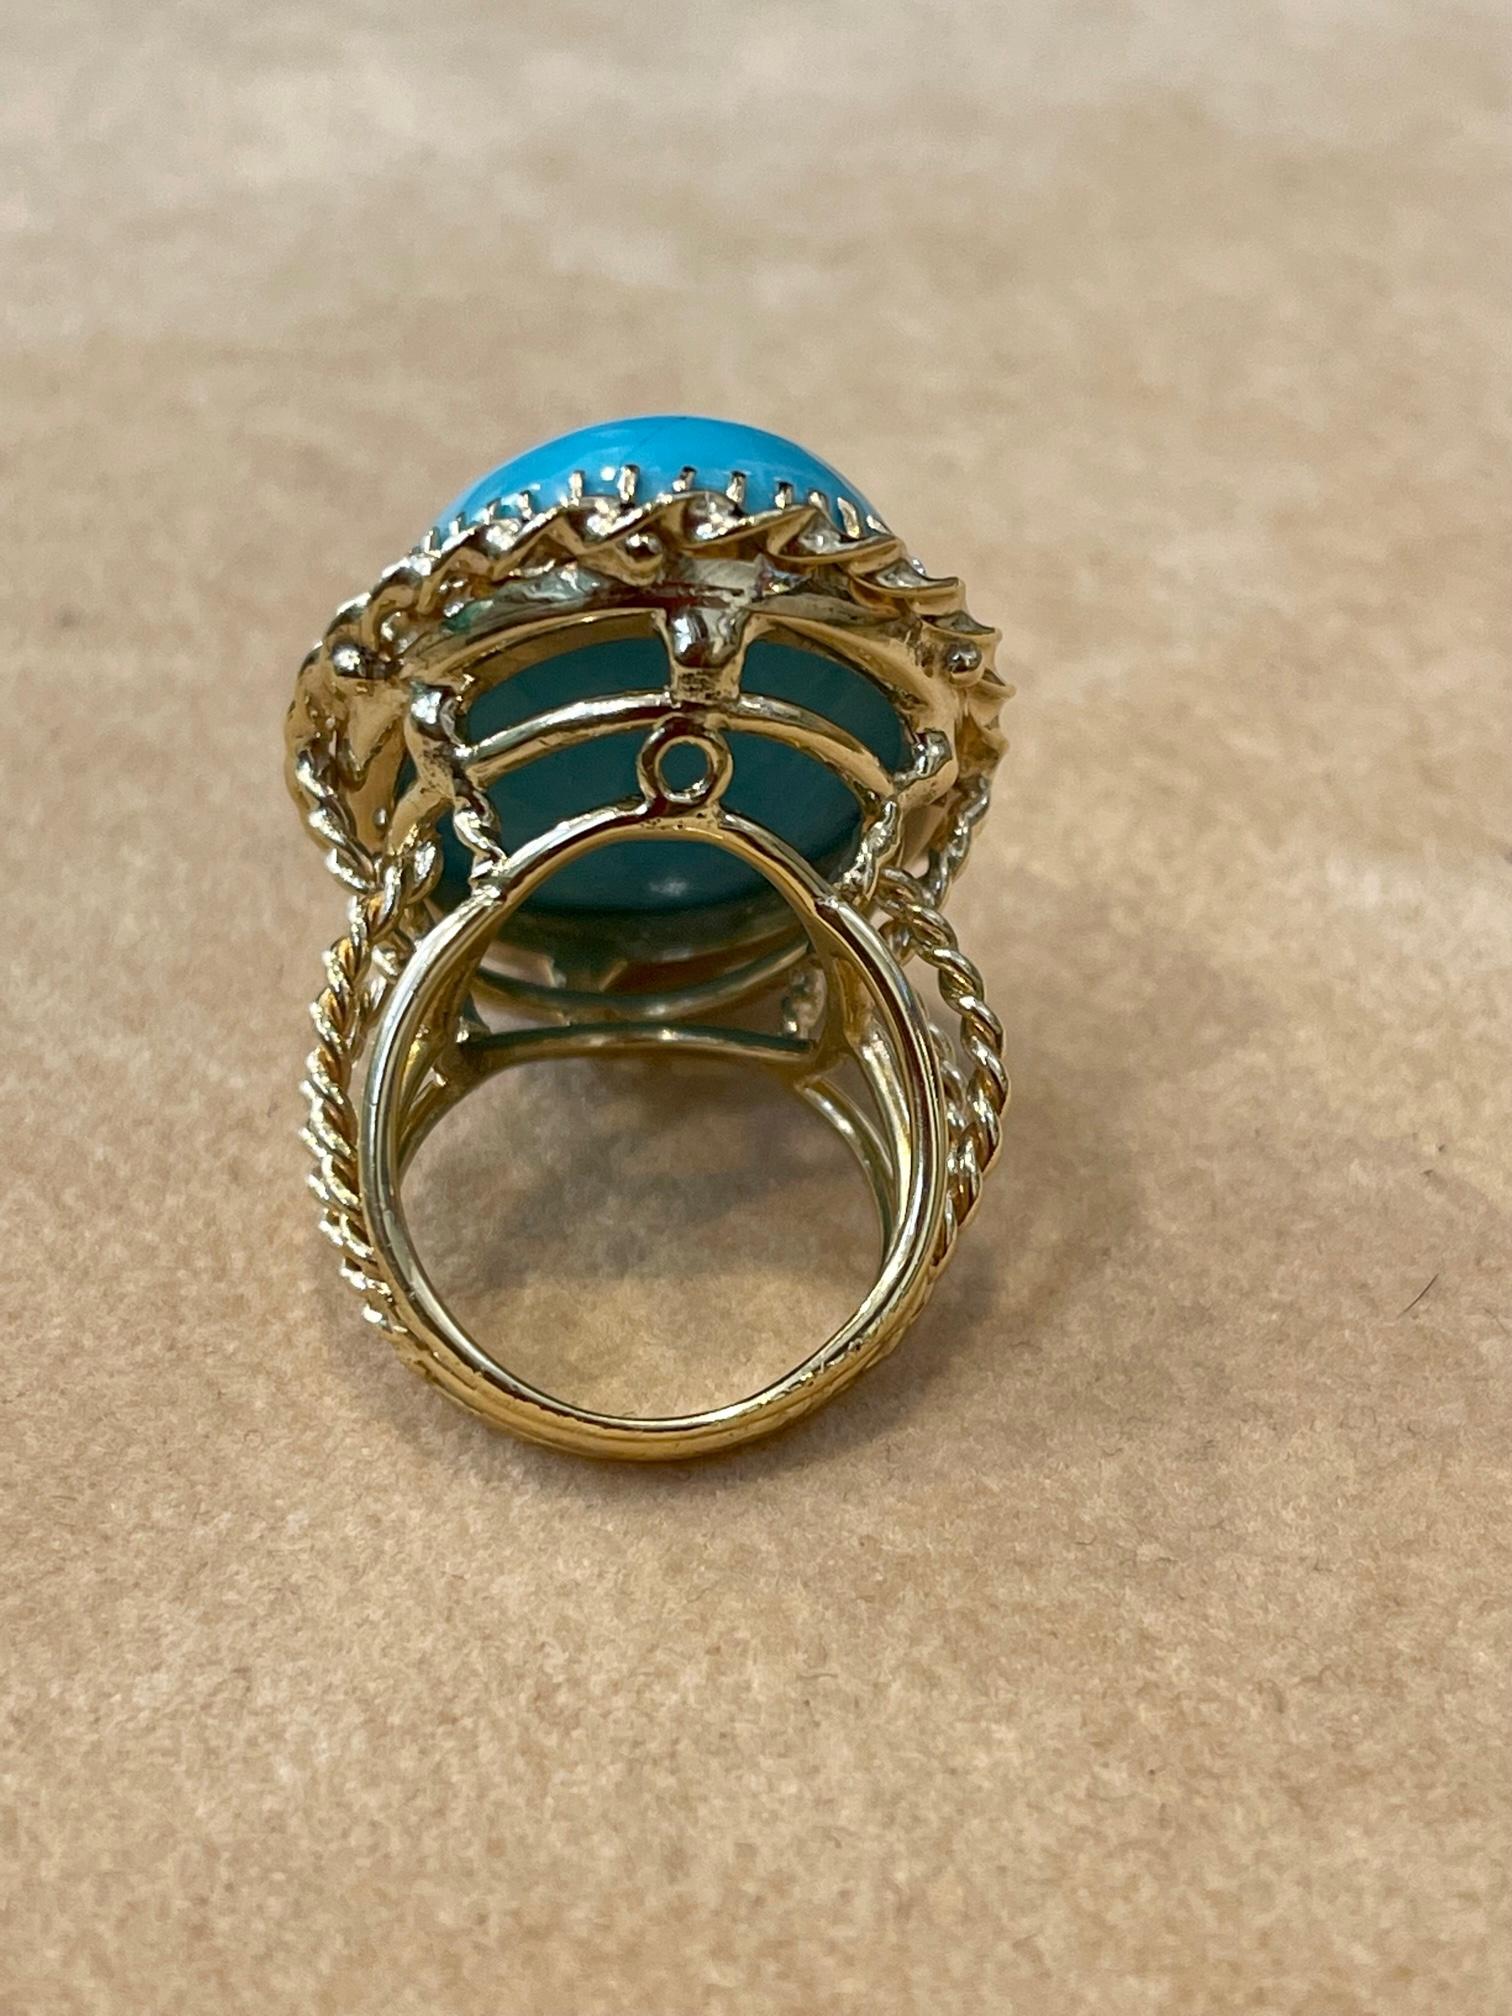 Cabochon Vintage 75 Ct Natural Oval Sleeping Beauty Turquoise Ring, 18 Kt Yellow Gold For Sale